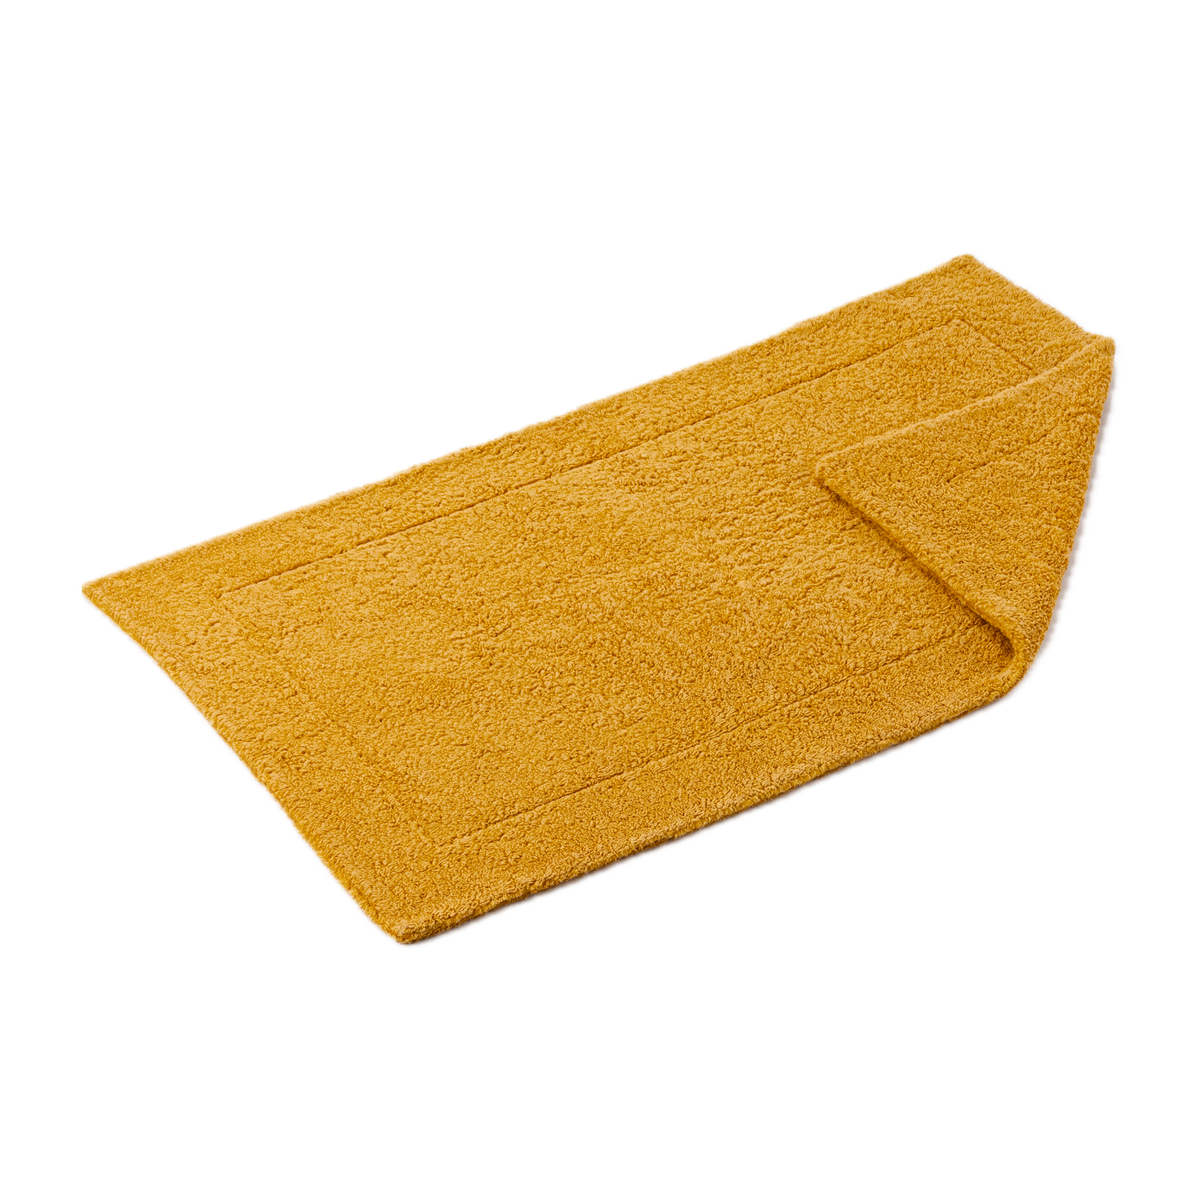 Slanted Image of Abyss Double Bath Tub Mat in Curcuma (870) Color with Fold